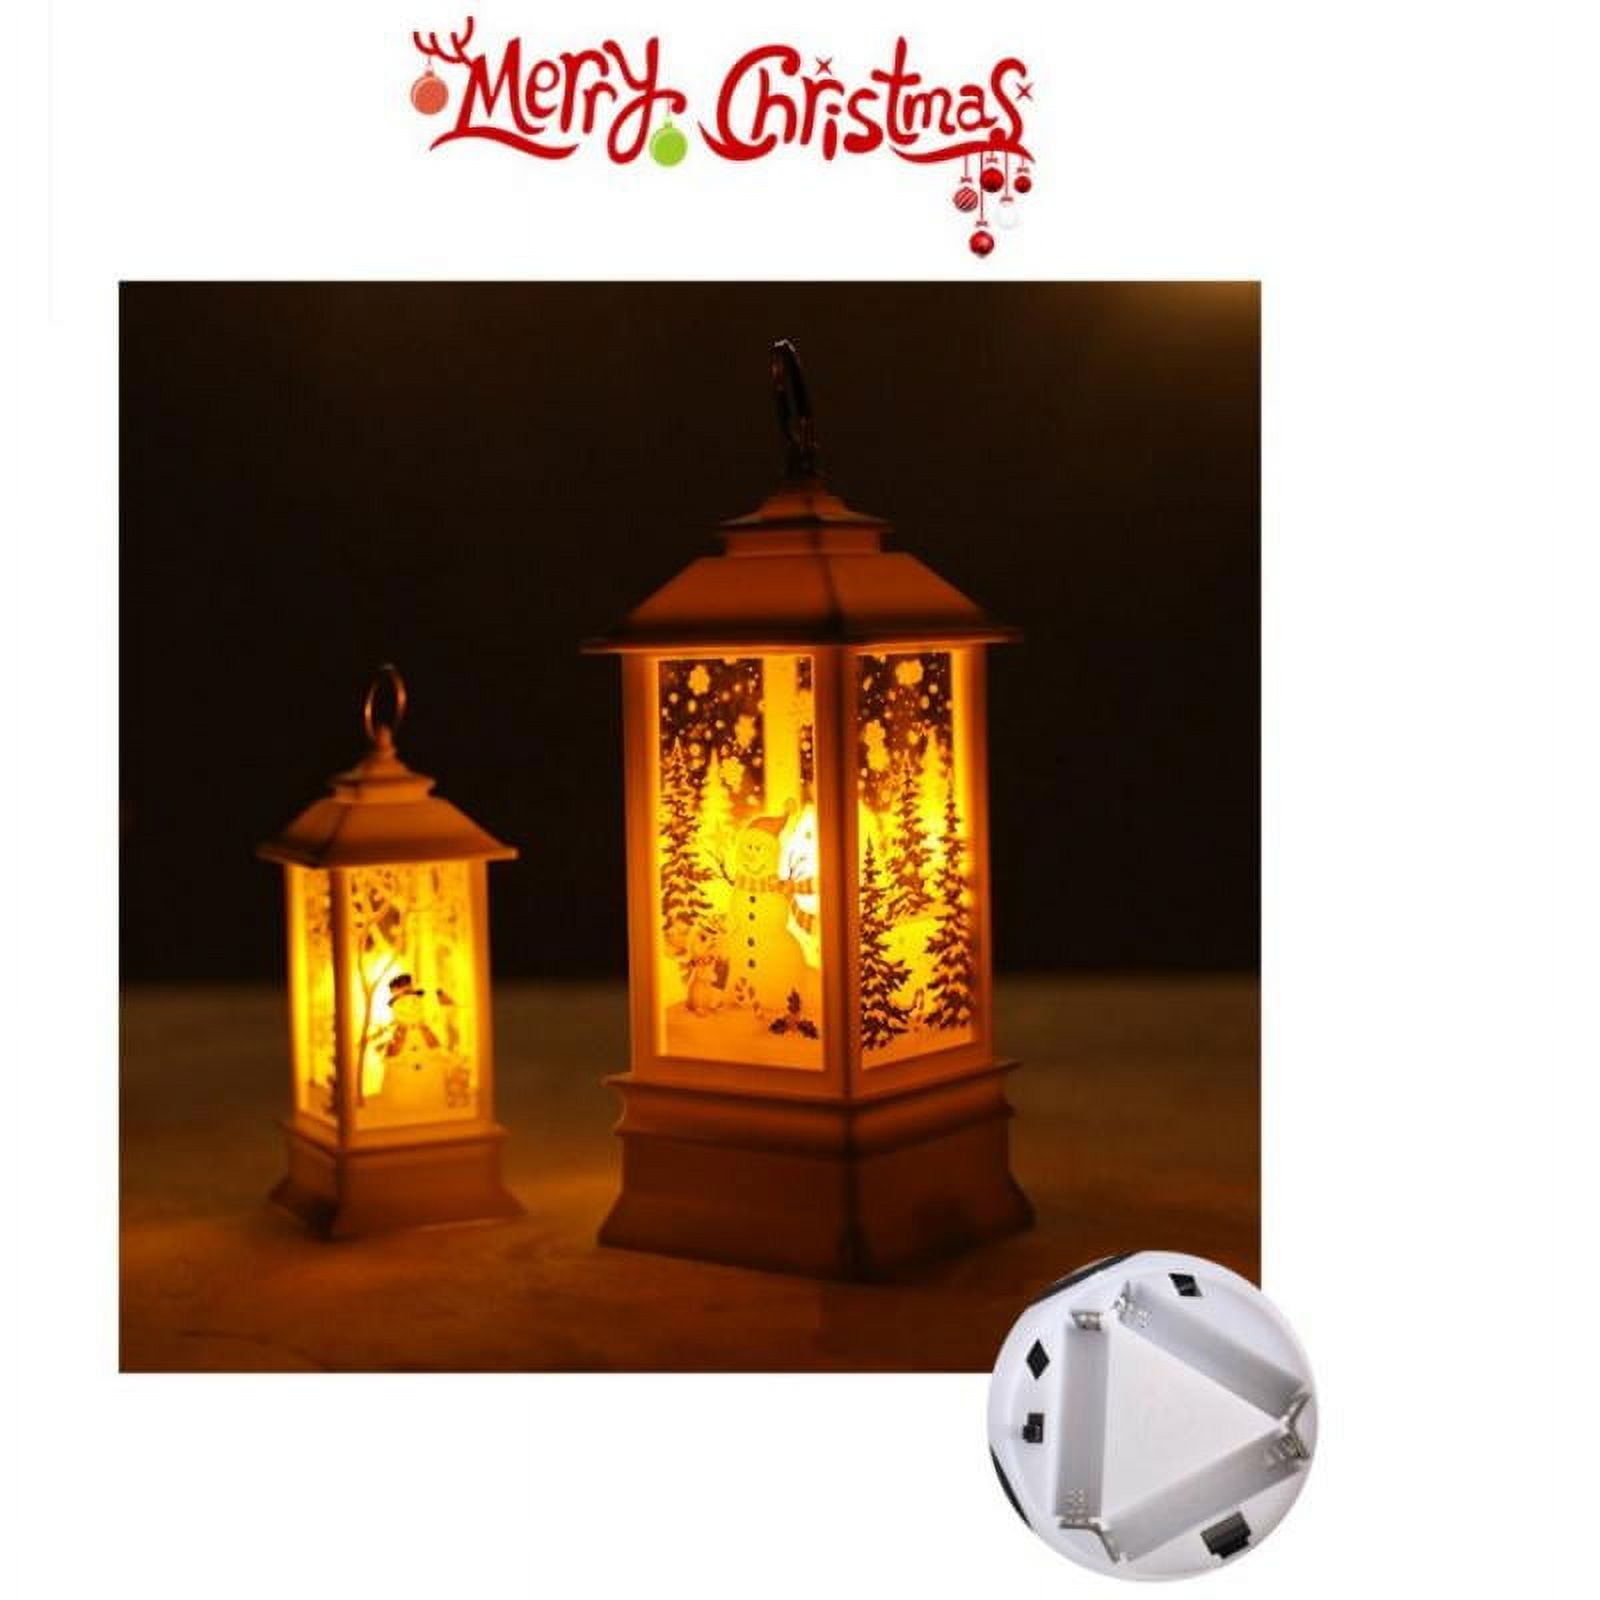  Decorative Candle Lanterns Flameless Battery-Operated with  Timer Function, Christmas Gifts, Holiday Lights,10'' Indoor Outdoor  Waterproof Hanging Lantern Decor for Wedding(Bronze, 1 : Home & Kitchen